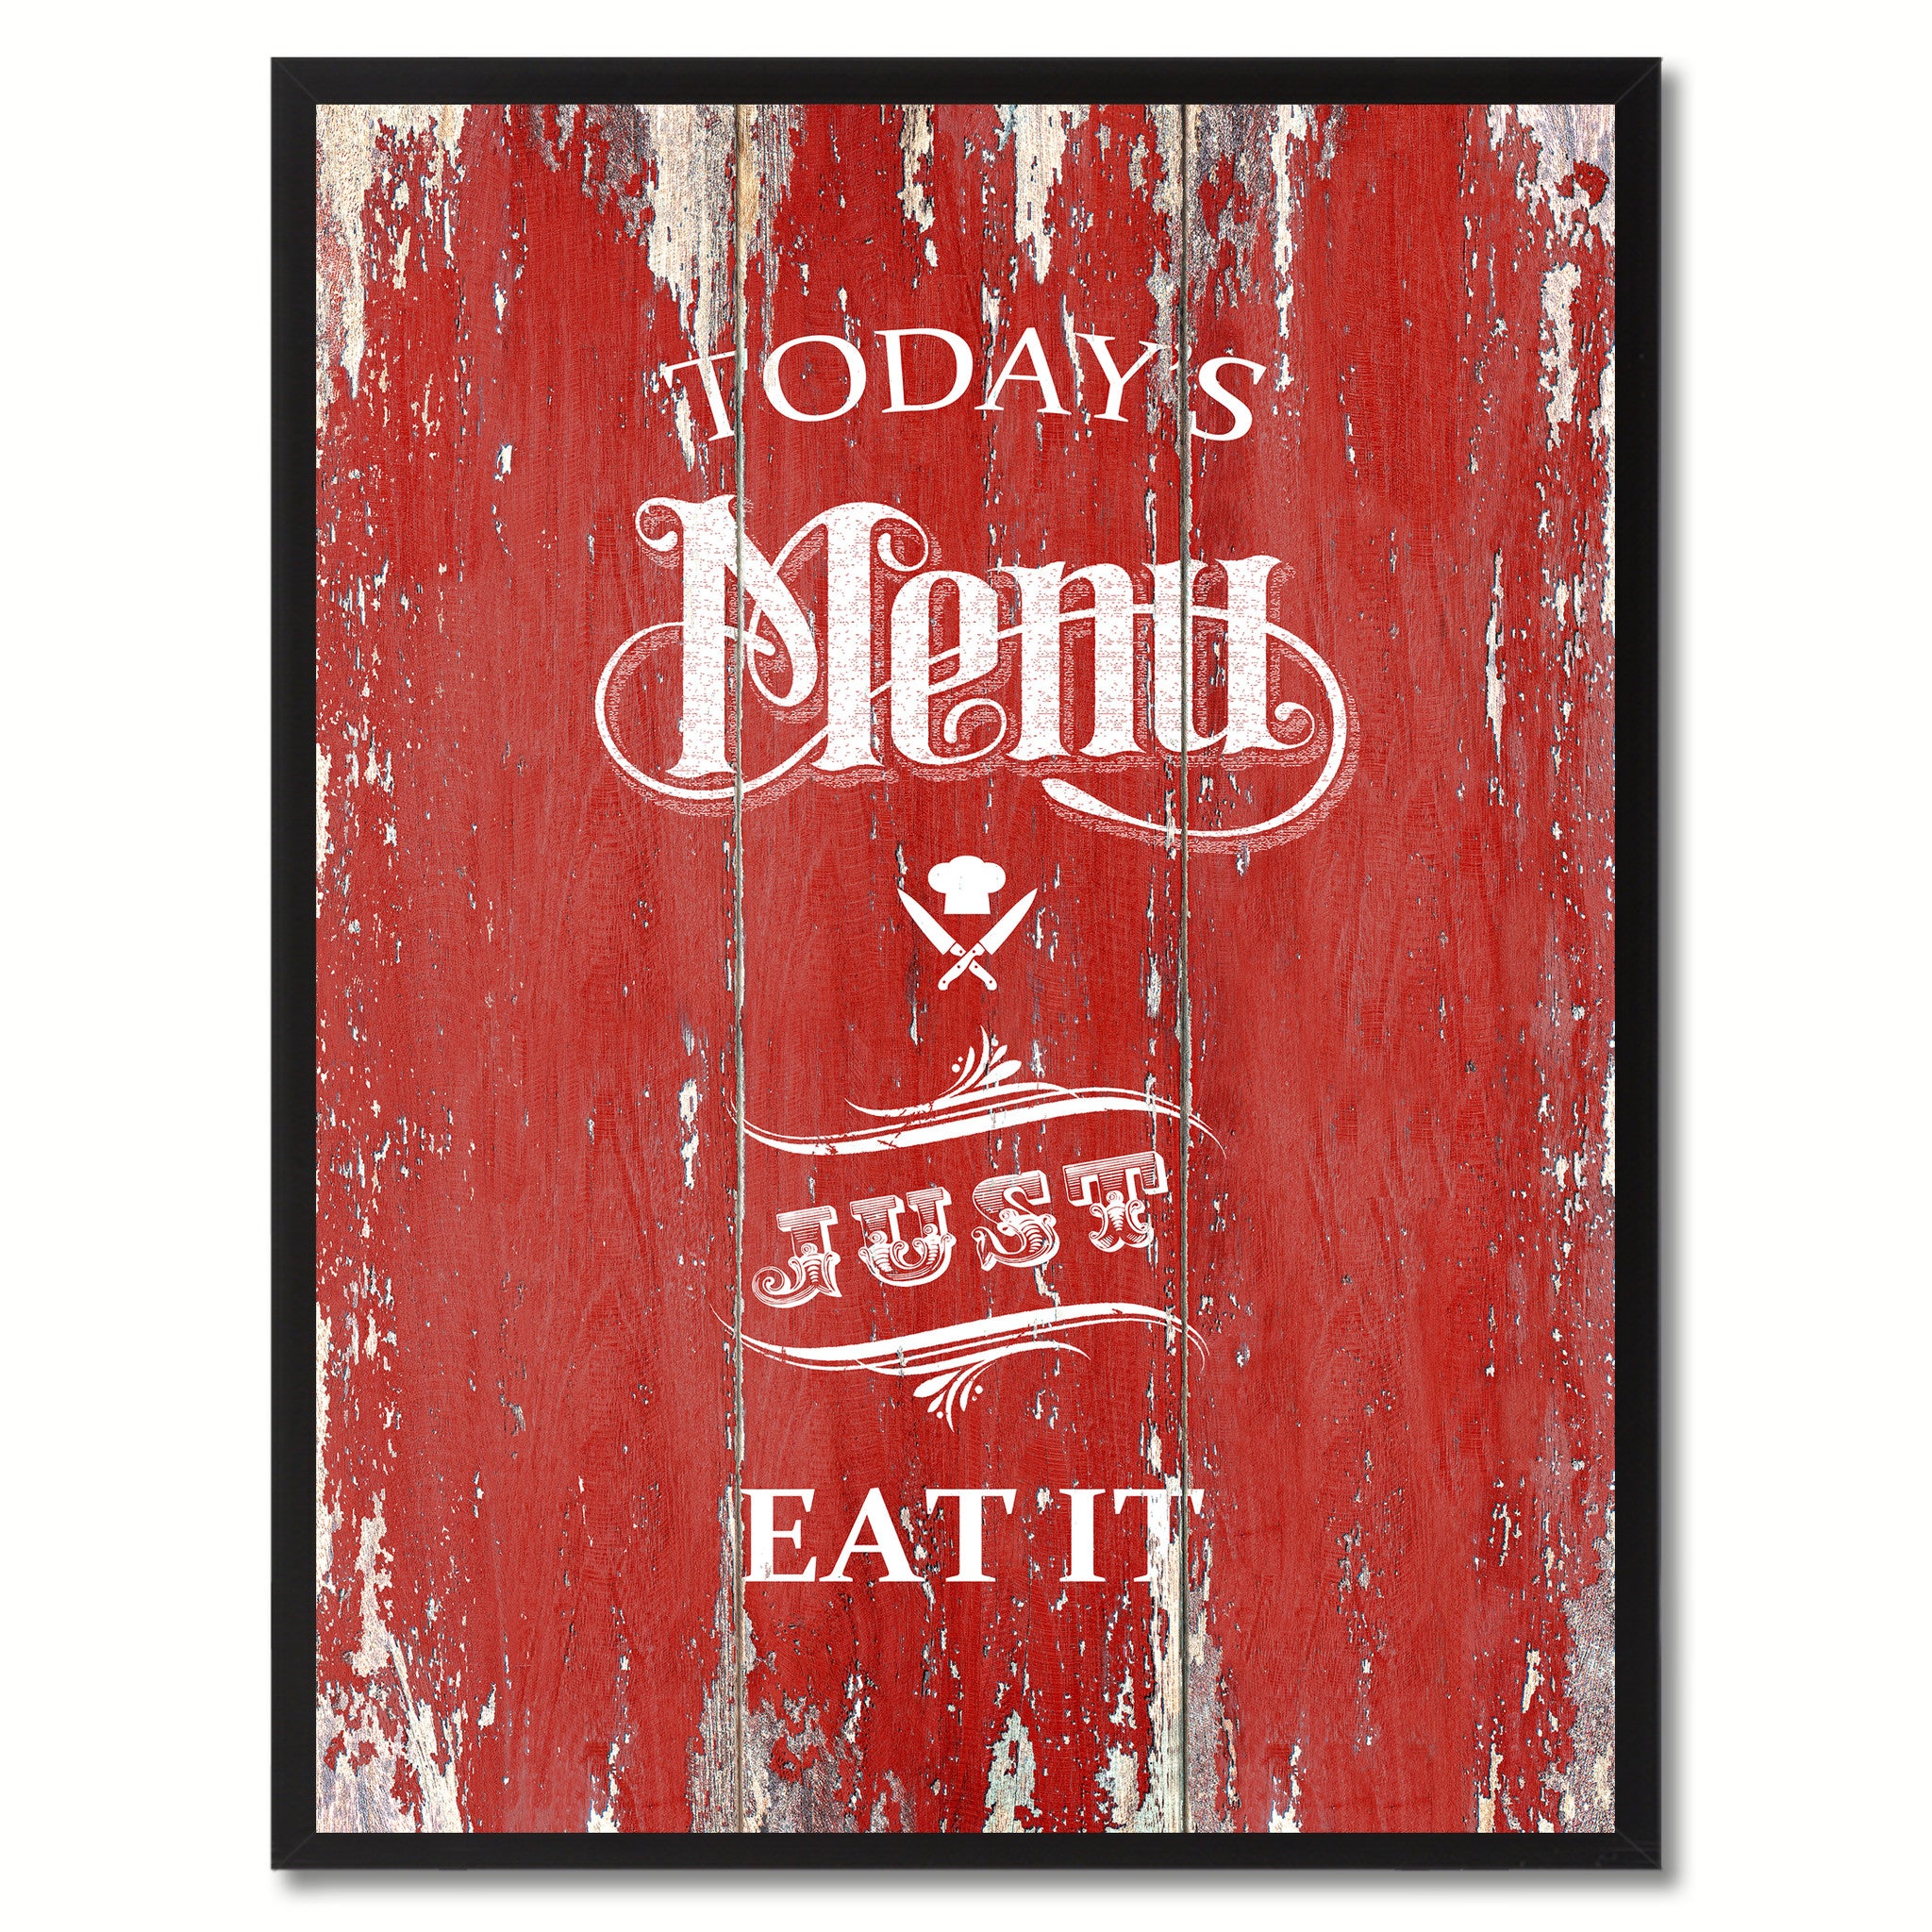 Today's menu just eat it Quote Saying Canvas Print with Picture Frame Home Decor Wall Art, Red